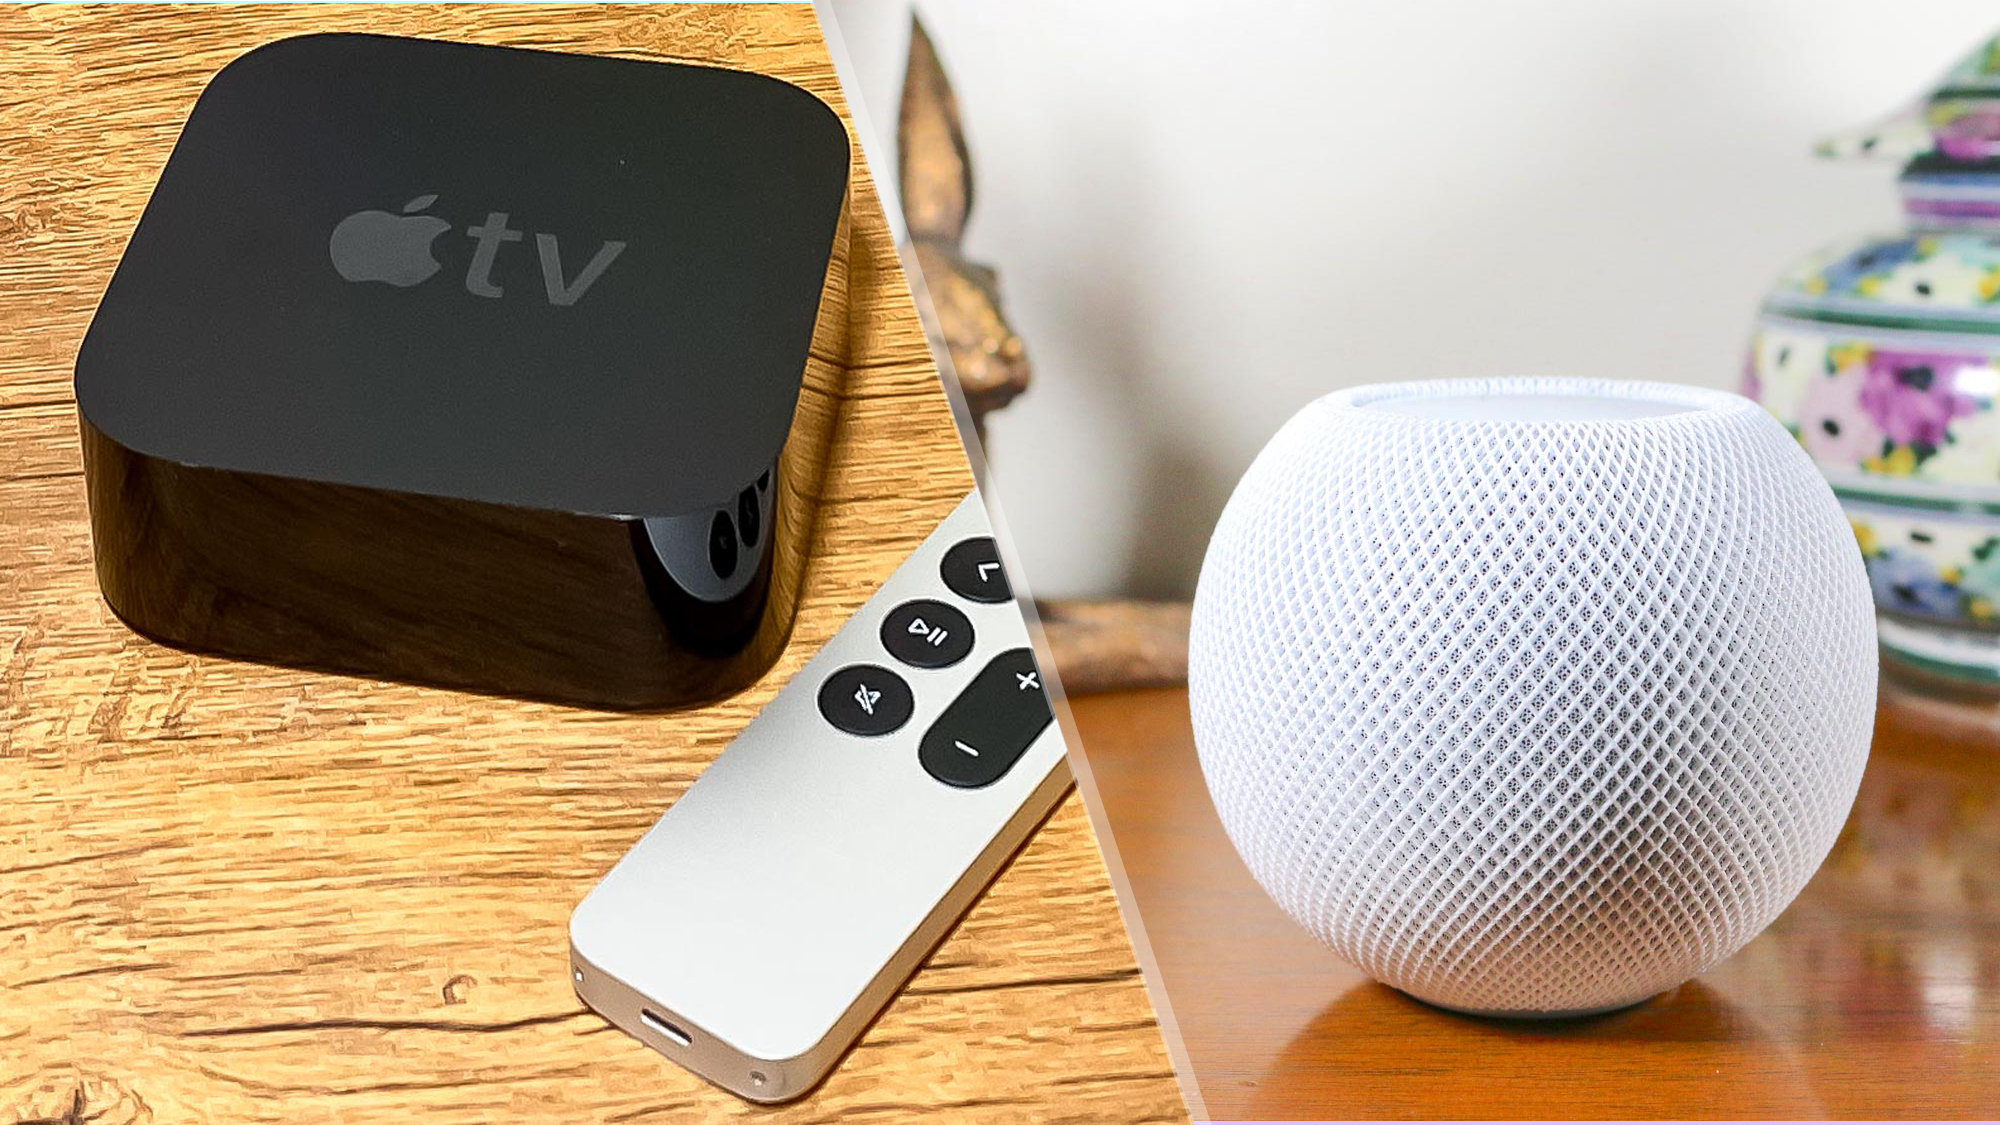 Is Your Living Room Ready? The New Apple TV Might Change How We Watch and Interact